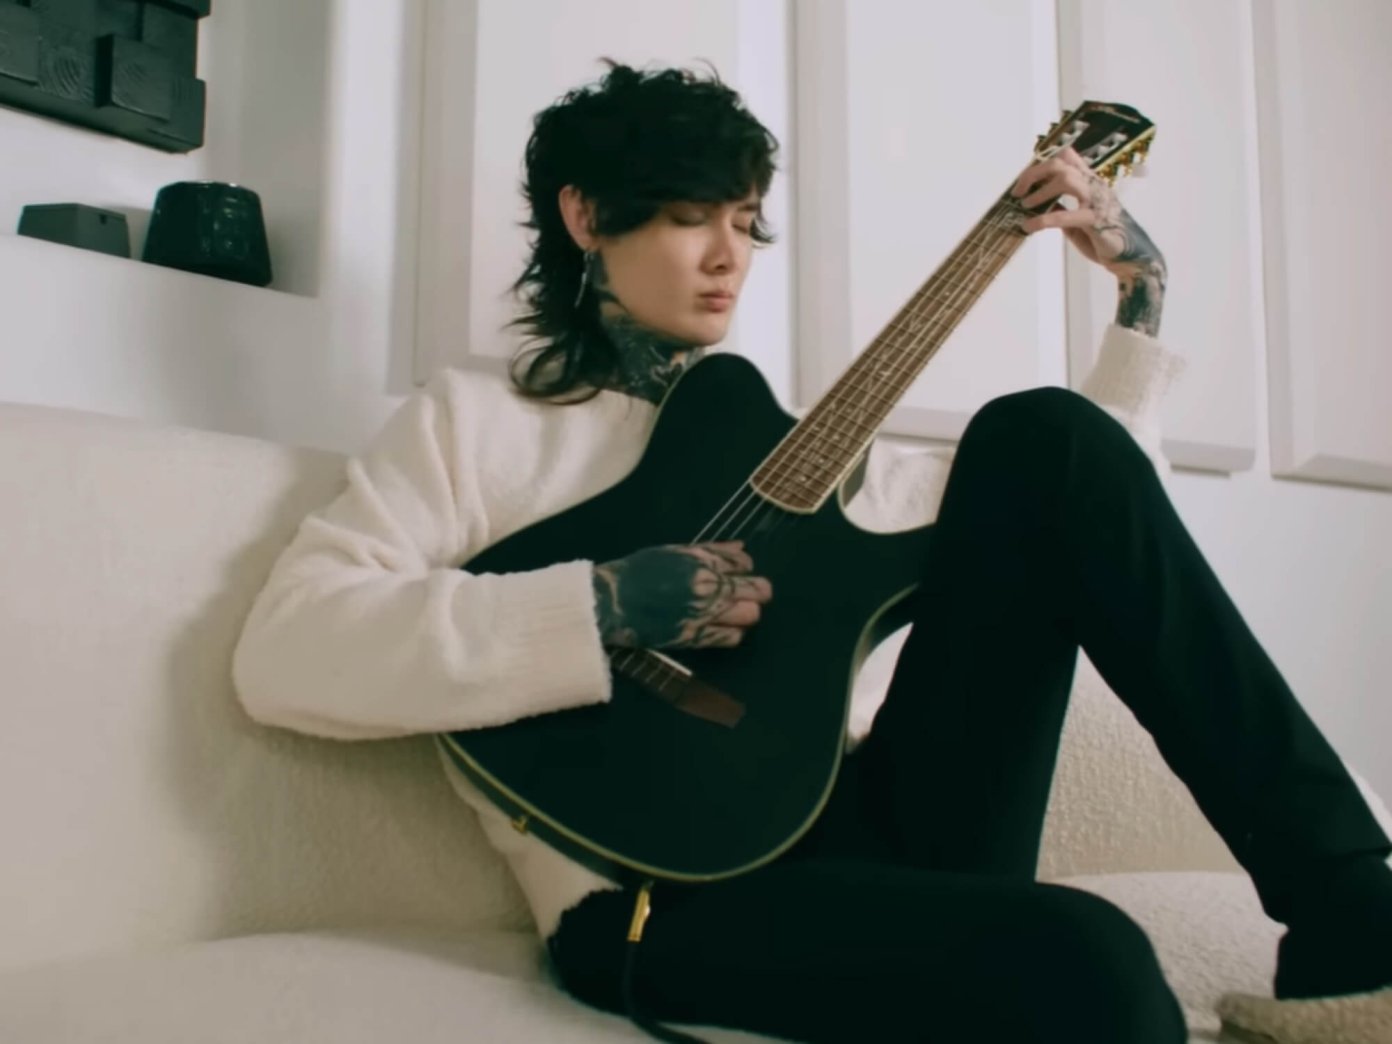 Polyphia’s Tim Henson says being grounded for weed helped him practice